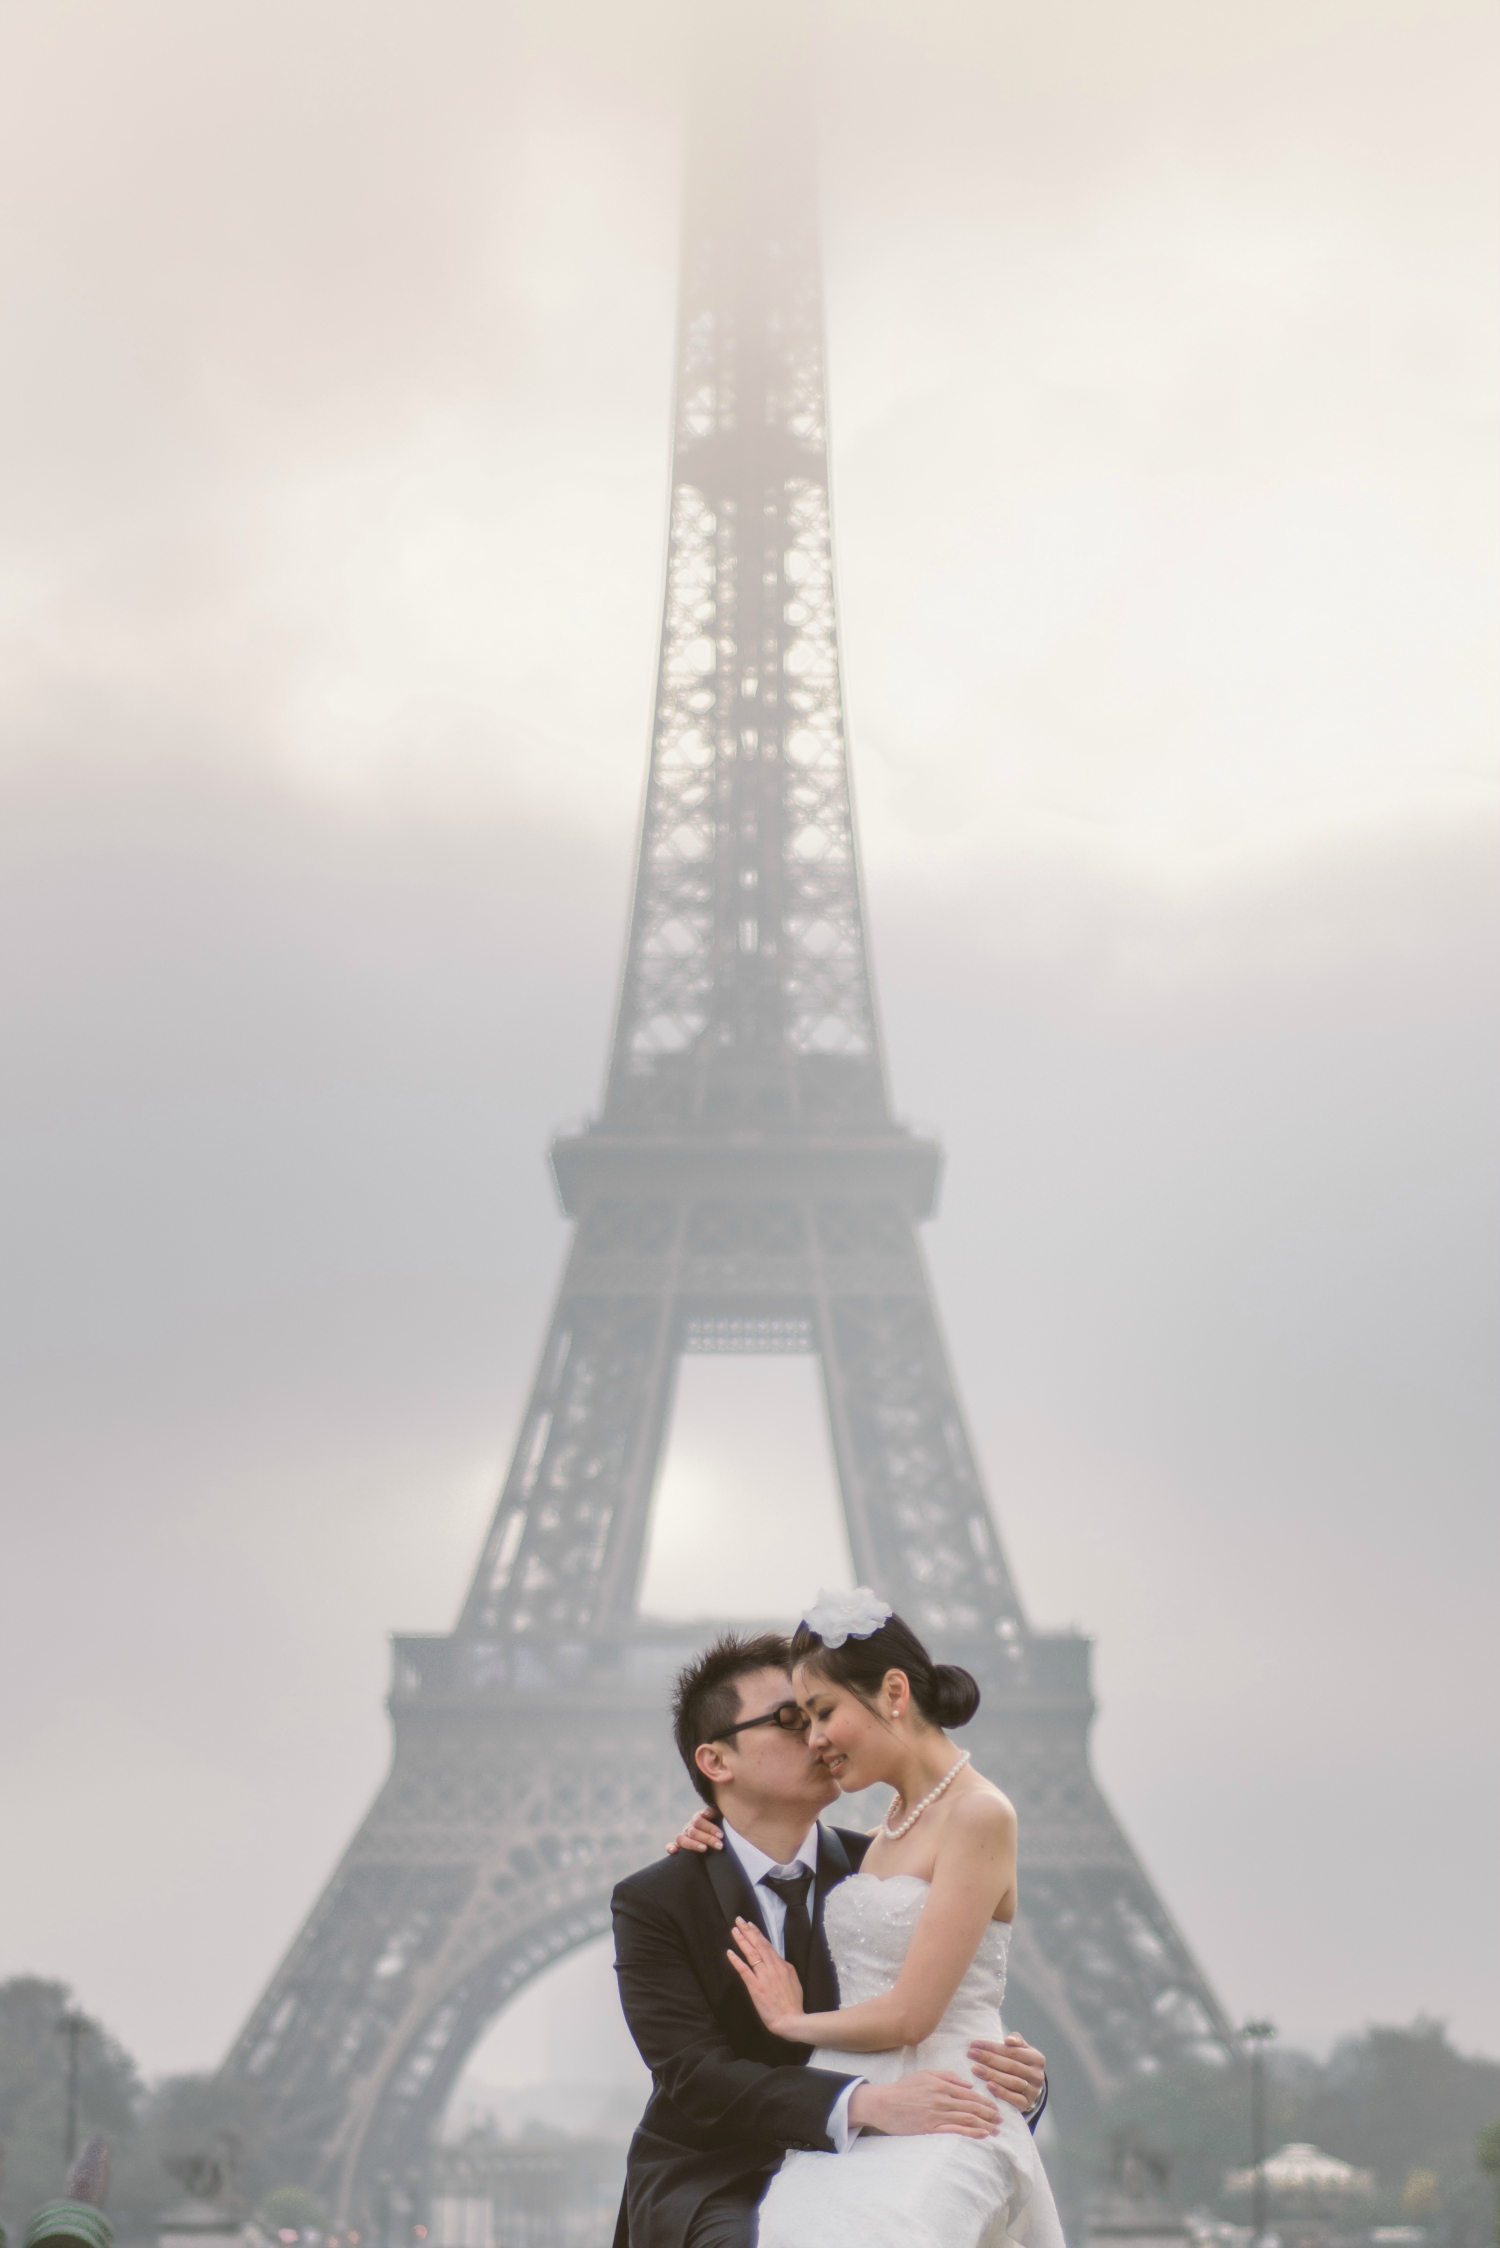 Prewedding session in Paris couple kissing in front of the foggy Eiffel Tower